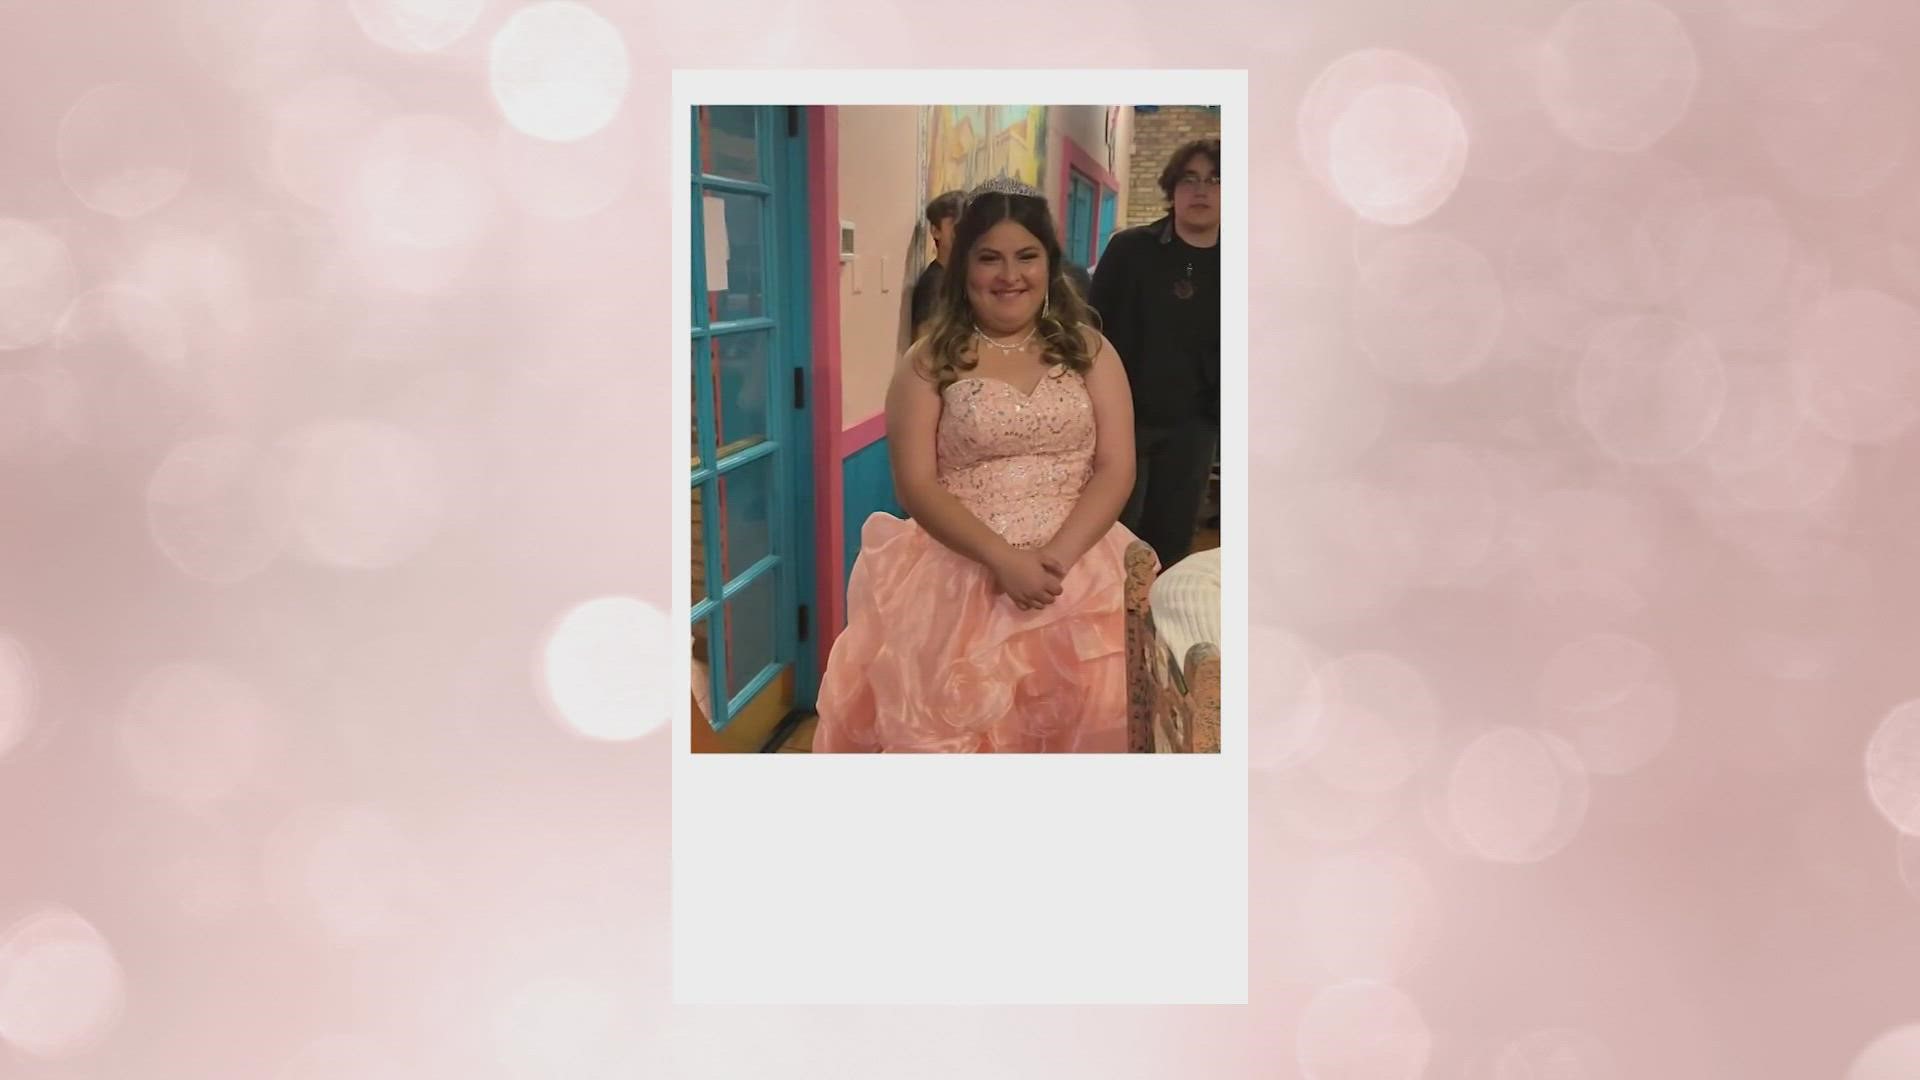 Two weeks ago, WFAA brought you the story of Dora, who was dreaming about a quinceañera for her 15th birthday. Thanks to your generosity, her dream came true!